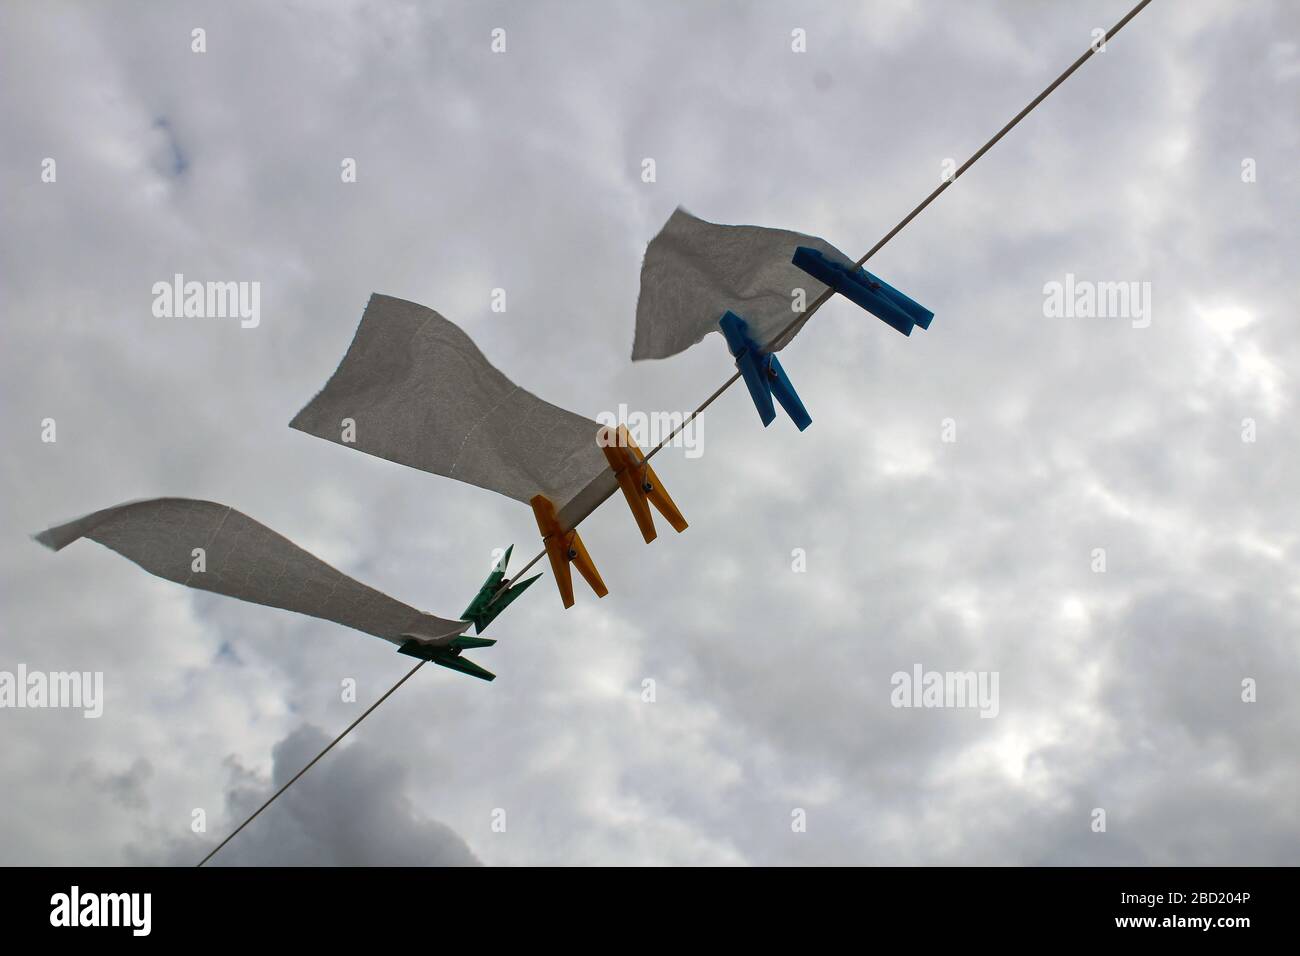 A washing line used for drying toilet paper on a windy day Stock Photo